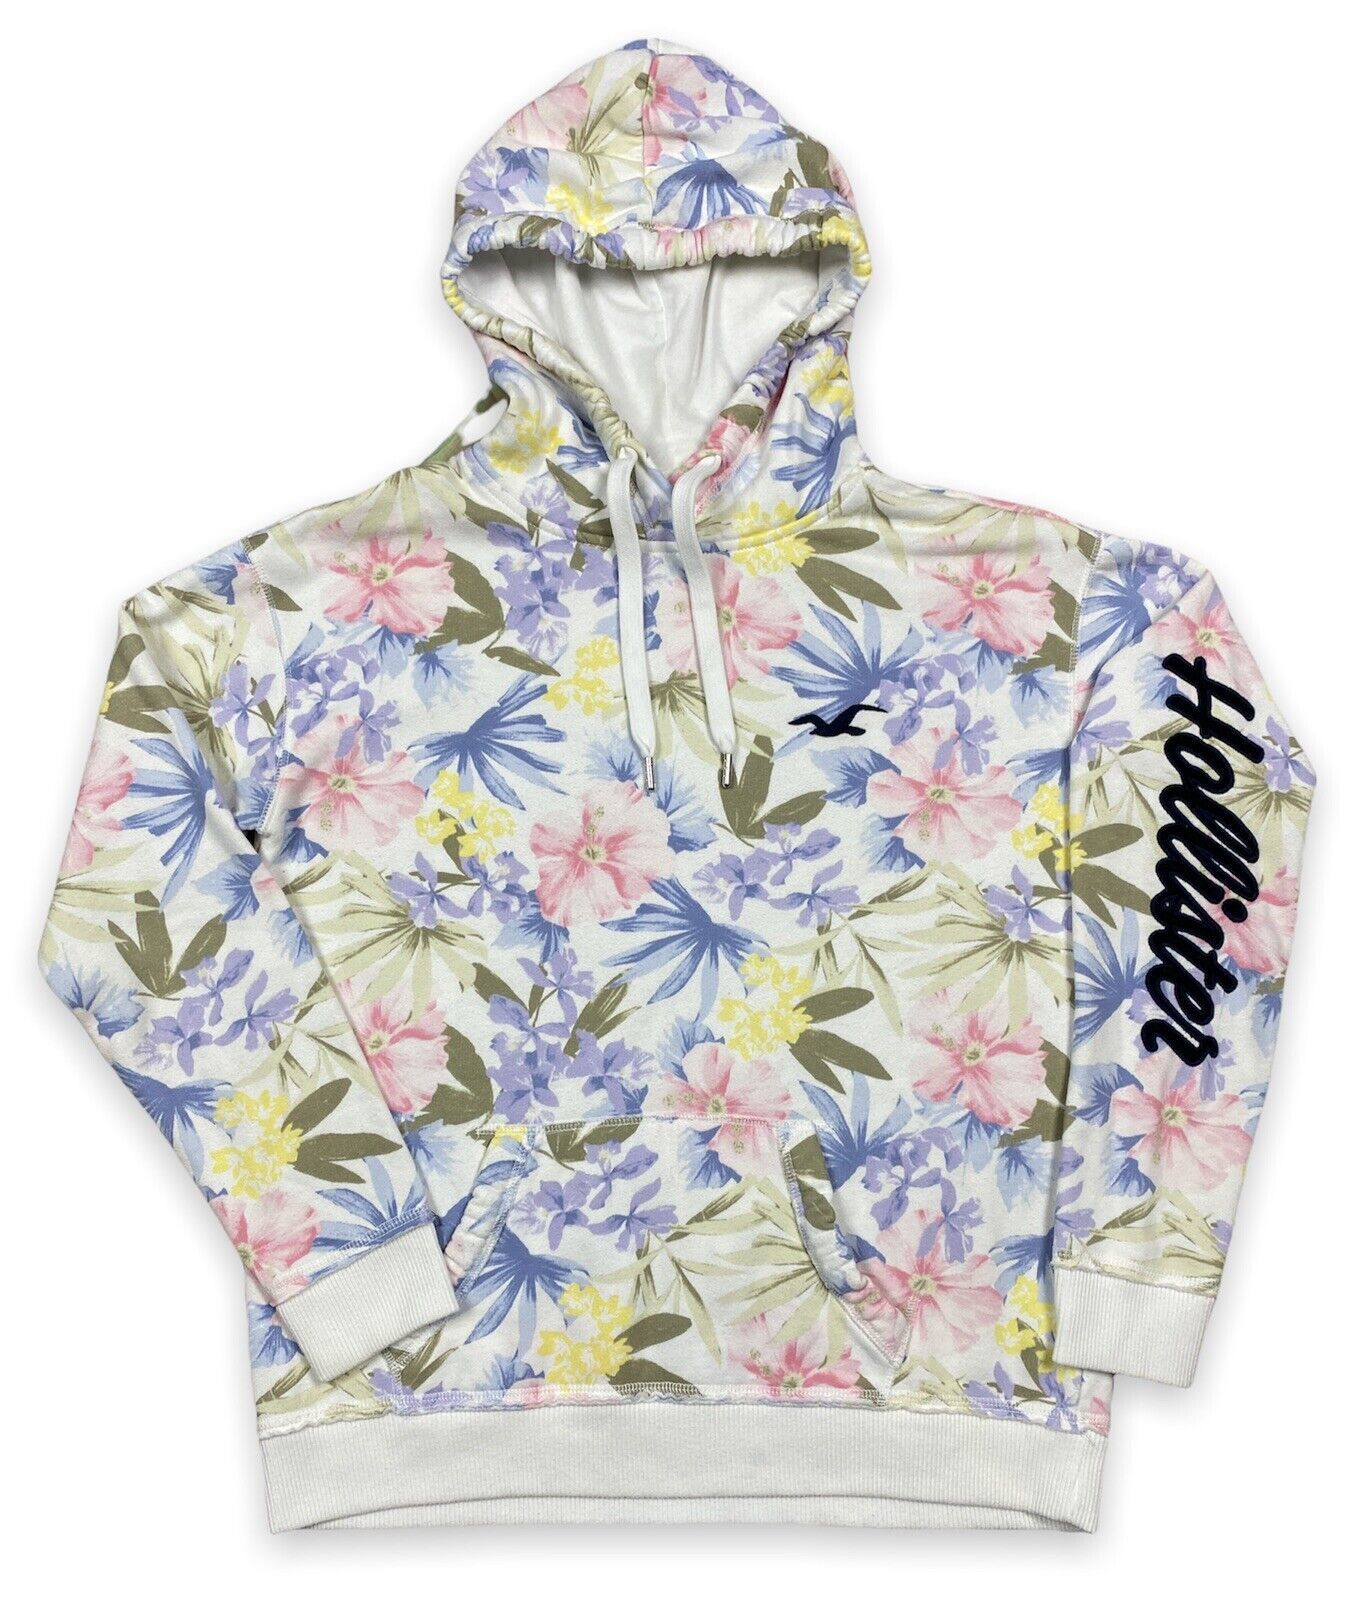 Primary image for Hollister All-Over Hawaiian Aloha Floral Embroidered Hoodie Sweatshirt Size M